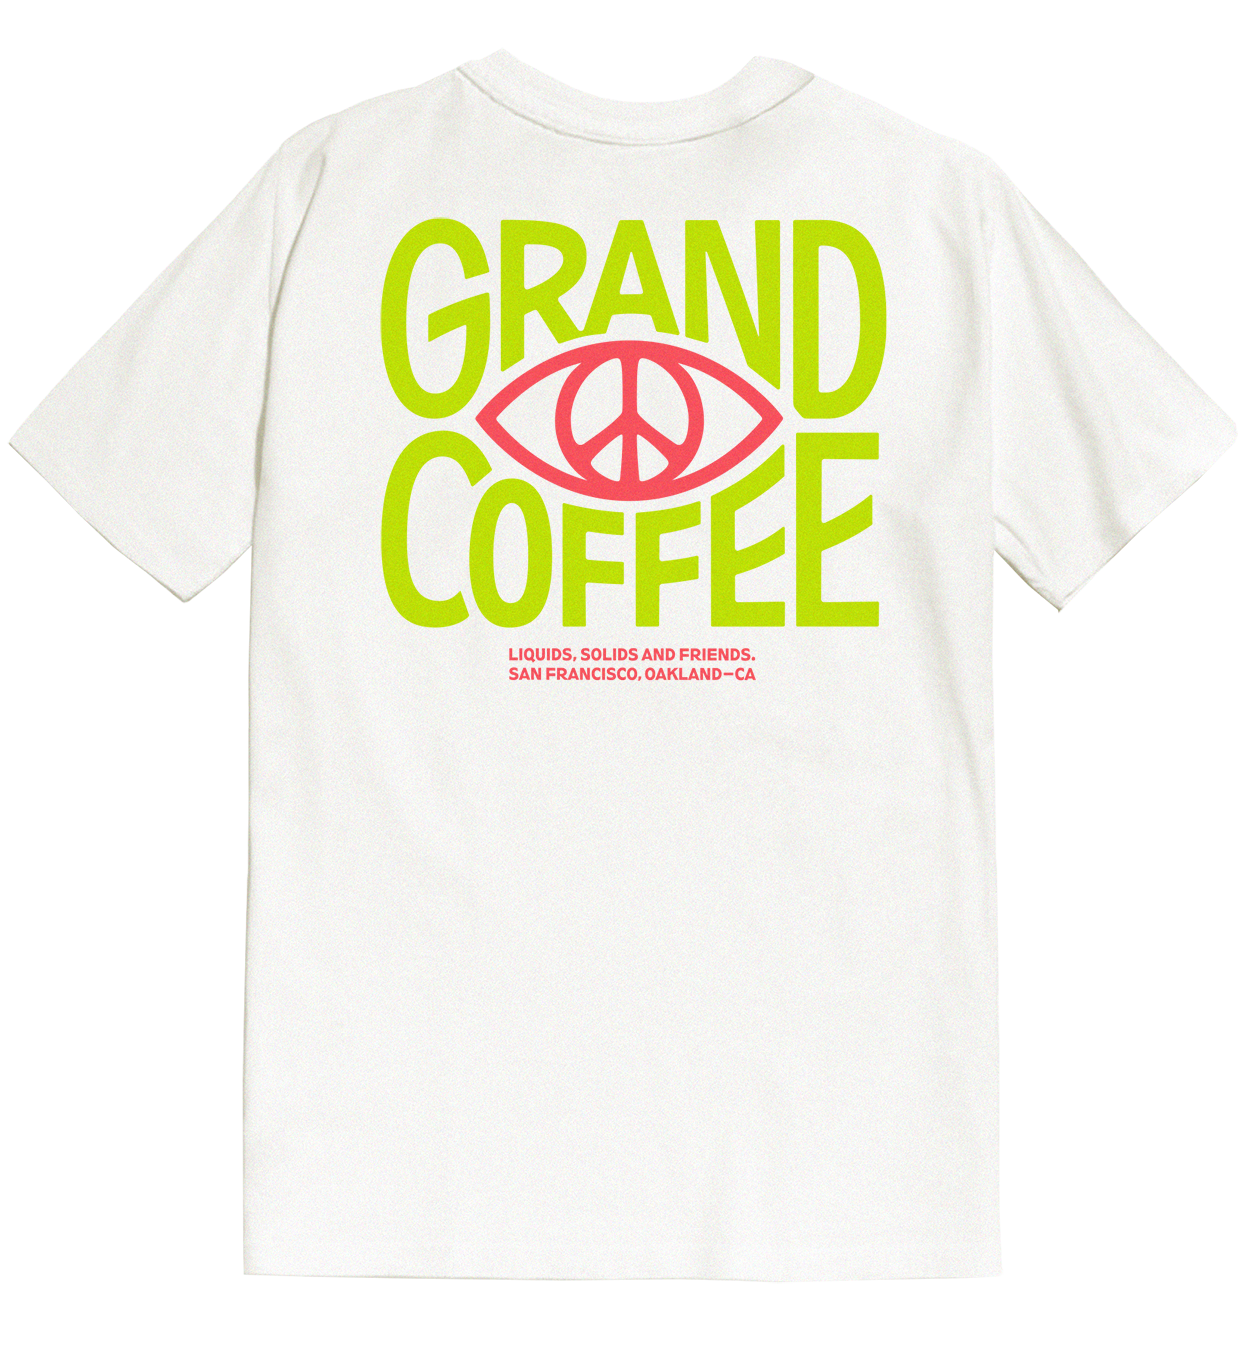 Peace Out Short Sleeve T-Shirt